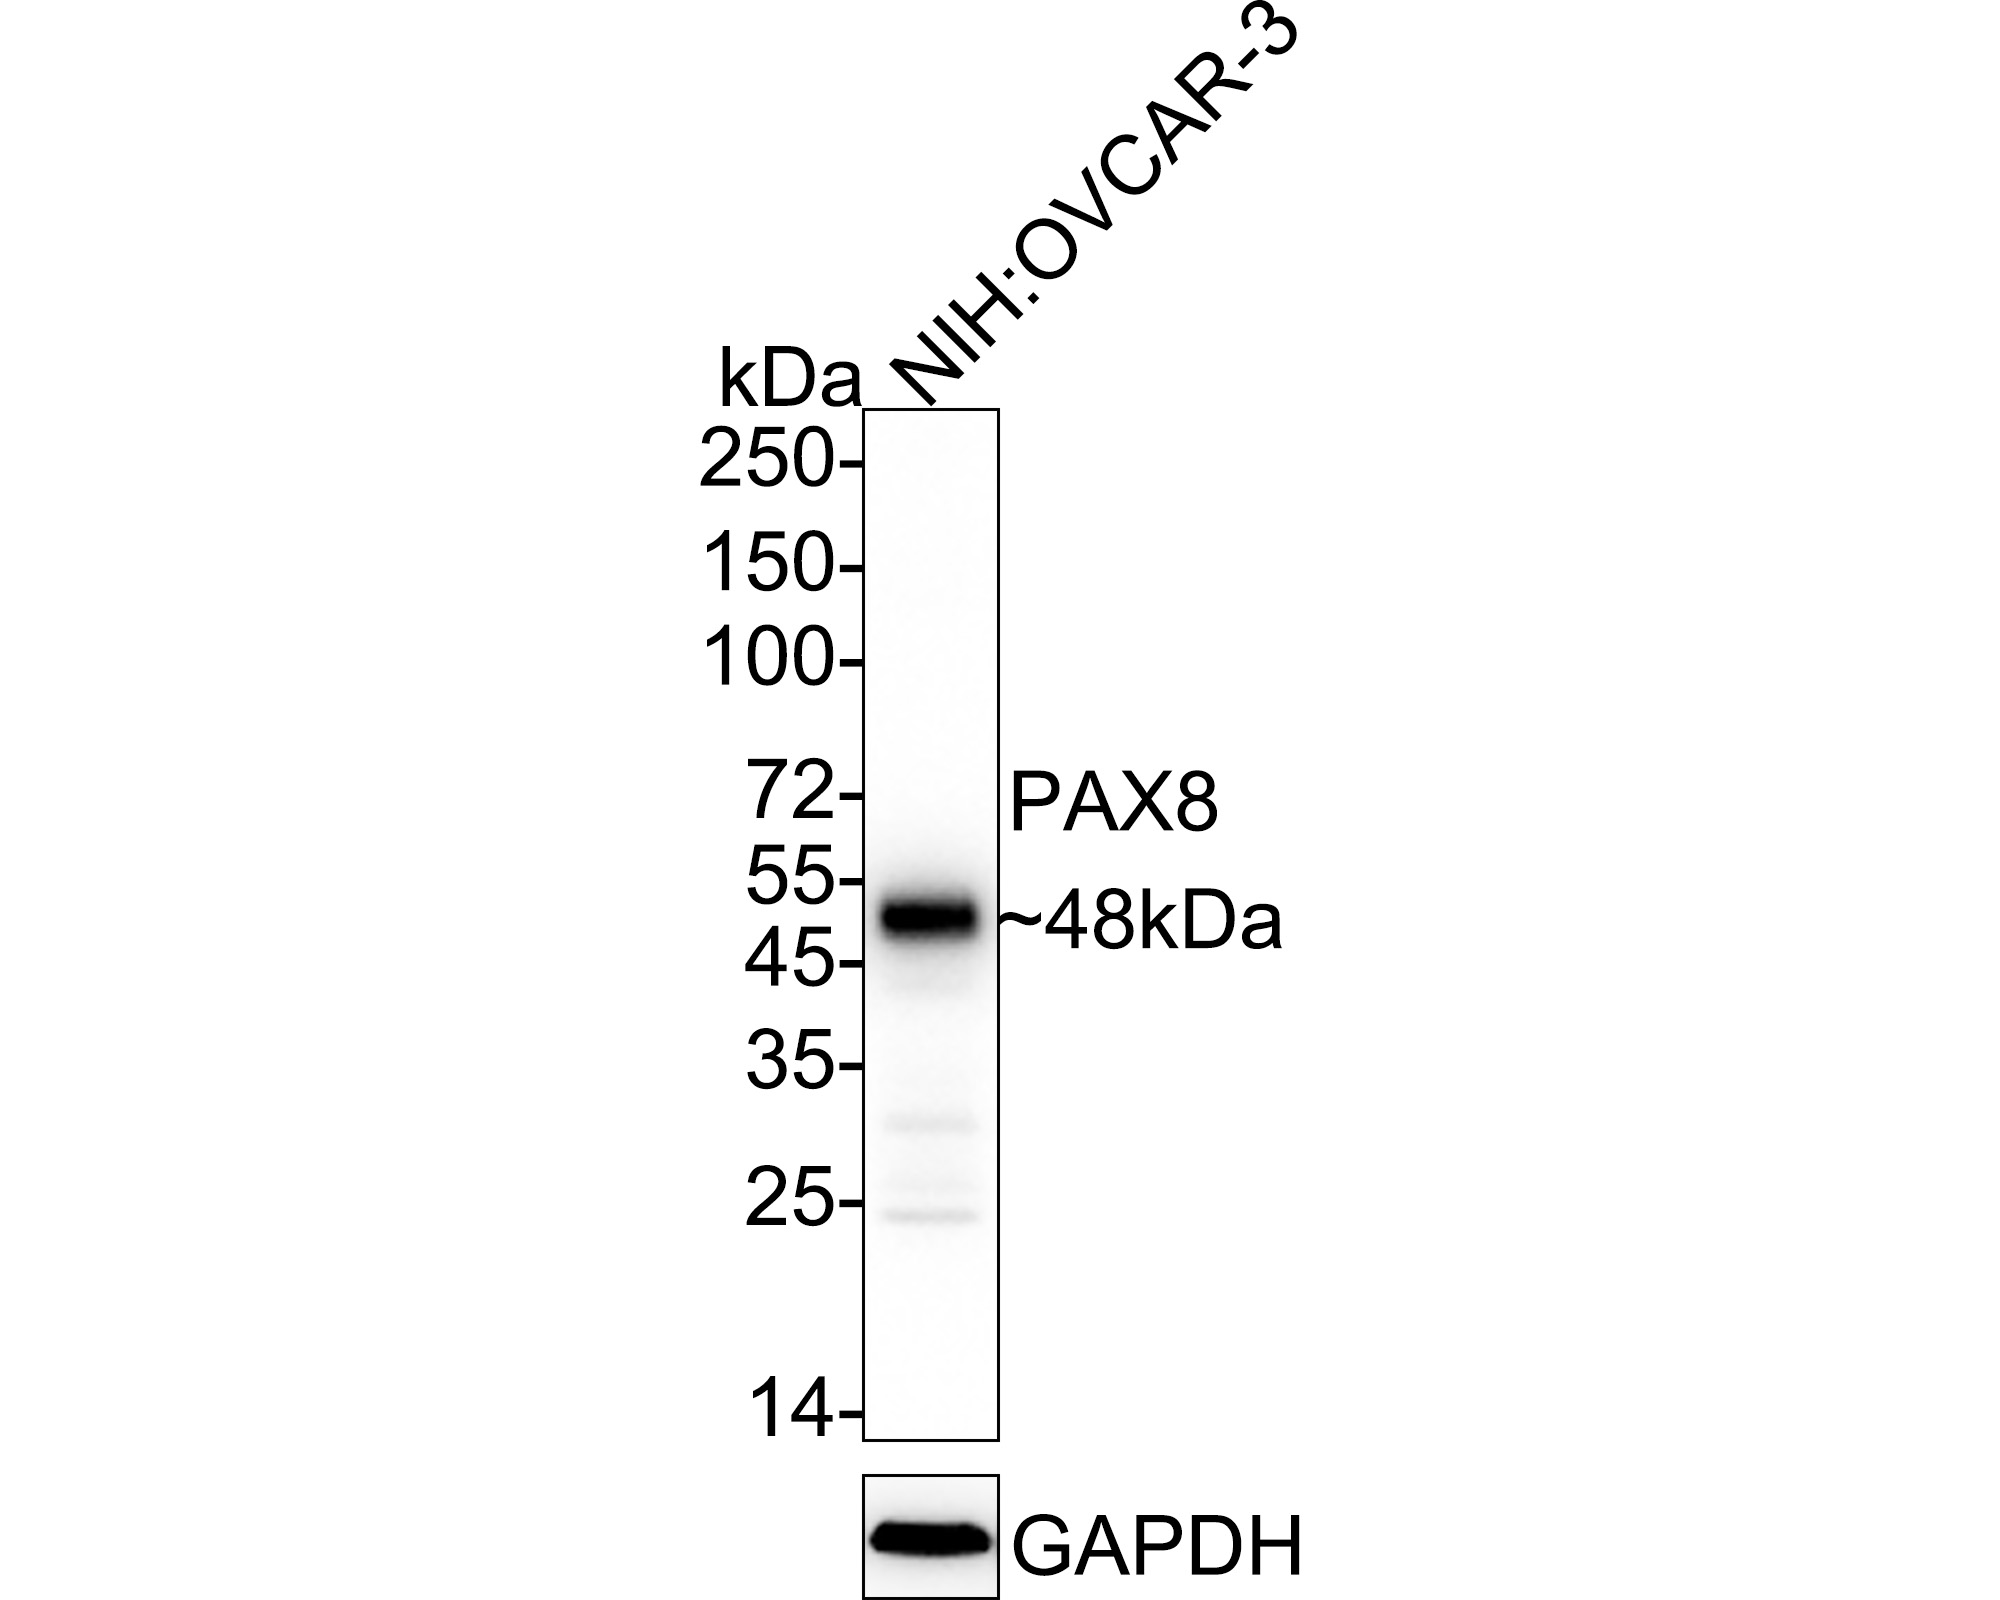 Western blot analysis of PAX8 on SKOV-3 cell lysates with Rabbit anti-PAX8 antibody (HA720112) at 1/1,000 dilution.<br />
<br />
Lysates/proteins at 10 µg/Lane.<br />
<br />
Predicted band size: 48 kDa<br />
Observed band size: 48 kDa<br />
<br />
Exposure time: 2 minutes;<br />
<br />
8% SDS-PAGE gel.<br />
<br />
Proteins were transferred to a PVDF membrane and blocked with 5% NFDM/TBST for 1 hour at room temperature. The primary antibody (HA720112) at 1/1,000 dilution was used in 5% NFDM/TBST at room temperature for 2 hours. Goat Anti-Rabbit IgG - HRP Secondary Antibody (HA1001) at 1:300,000 dilution was used for 1 hour at room temperature.